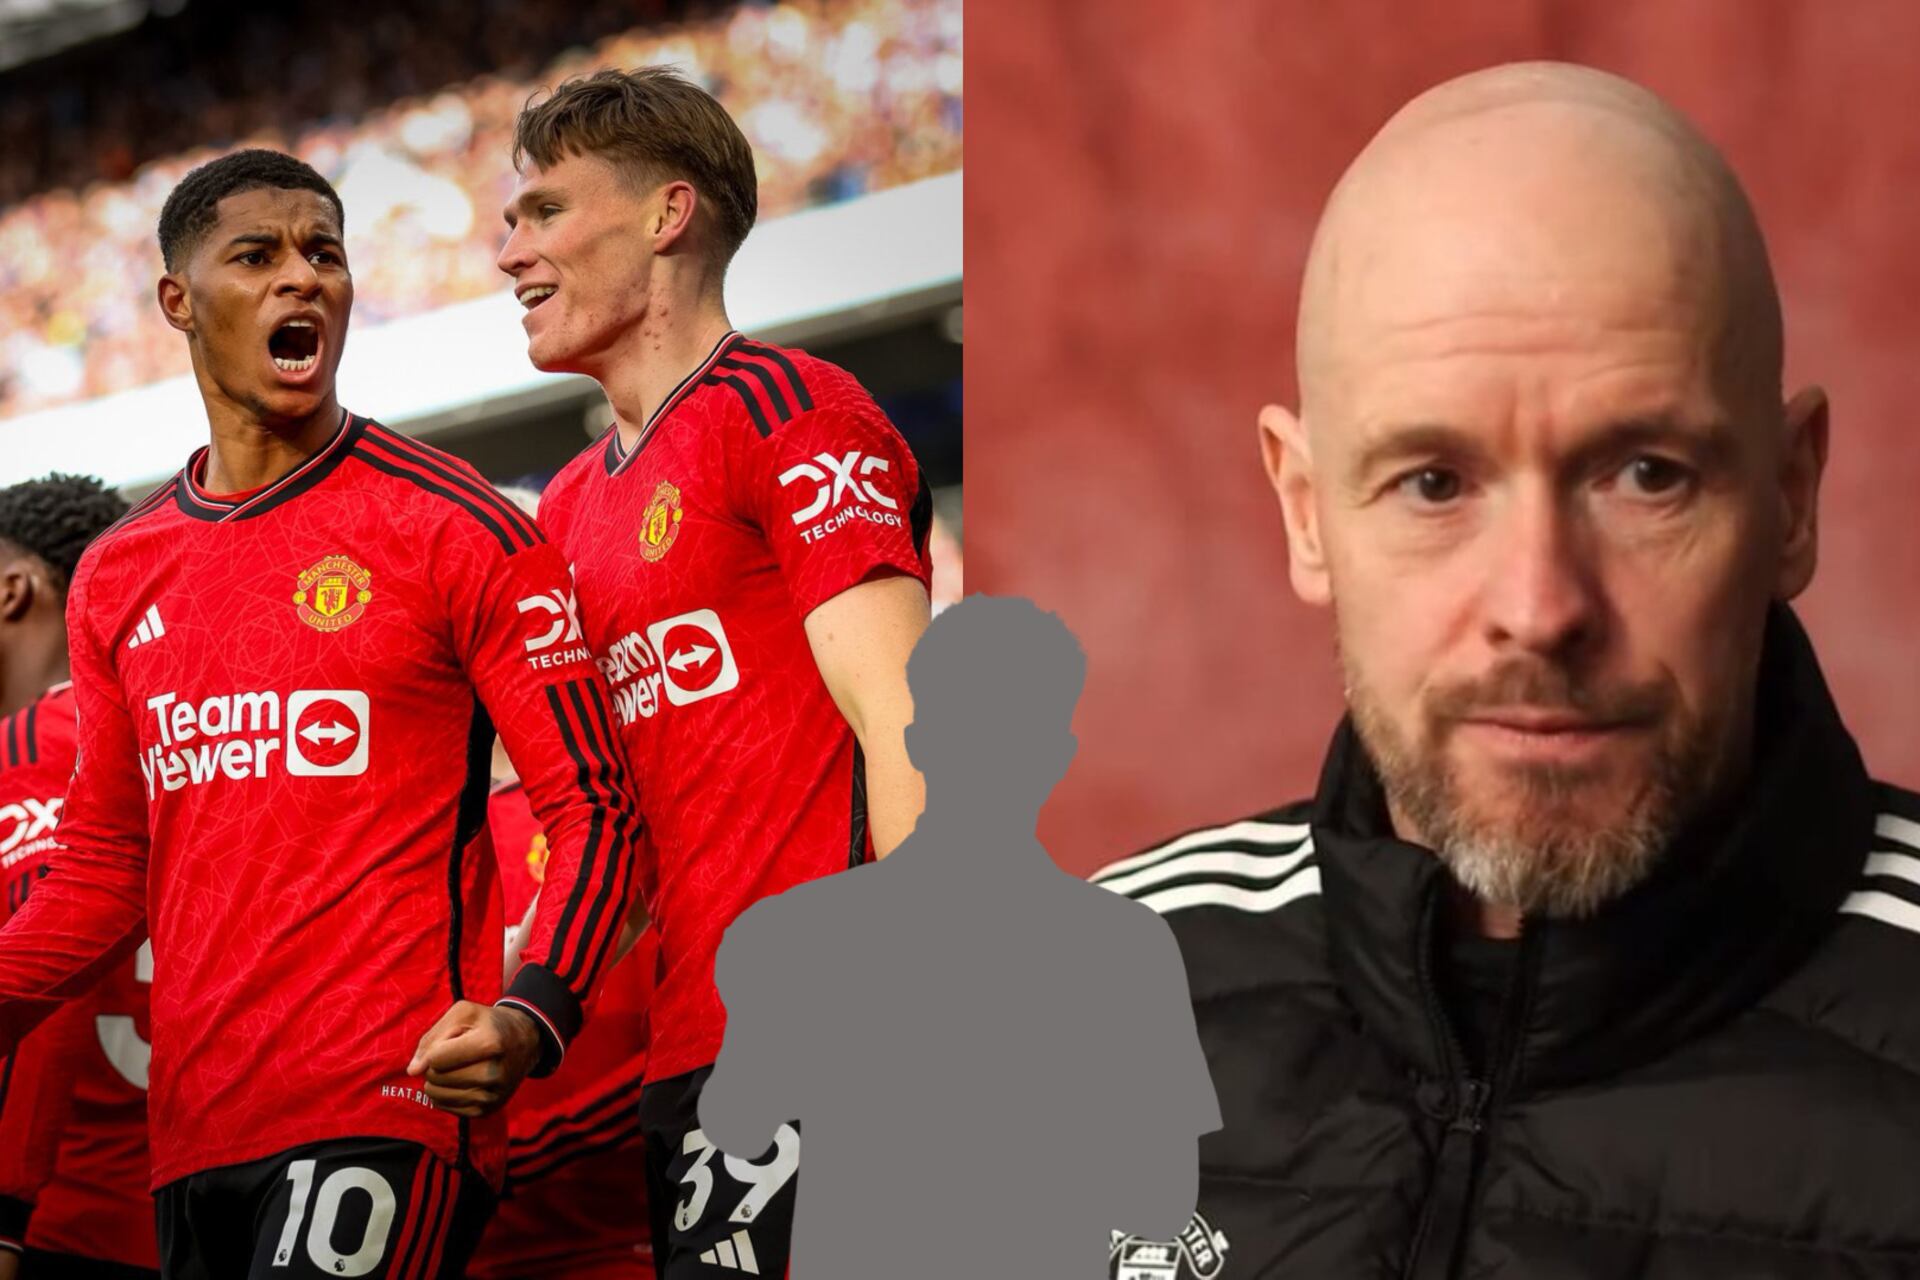 Not Rashford, the Manchester United player to leave if Ten Hag is sacked